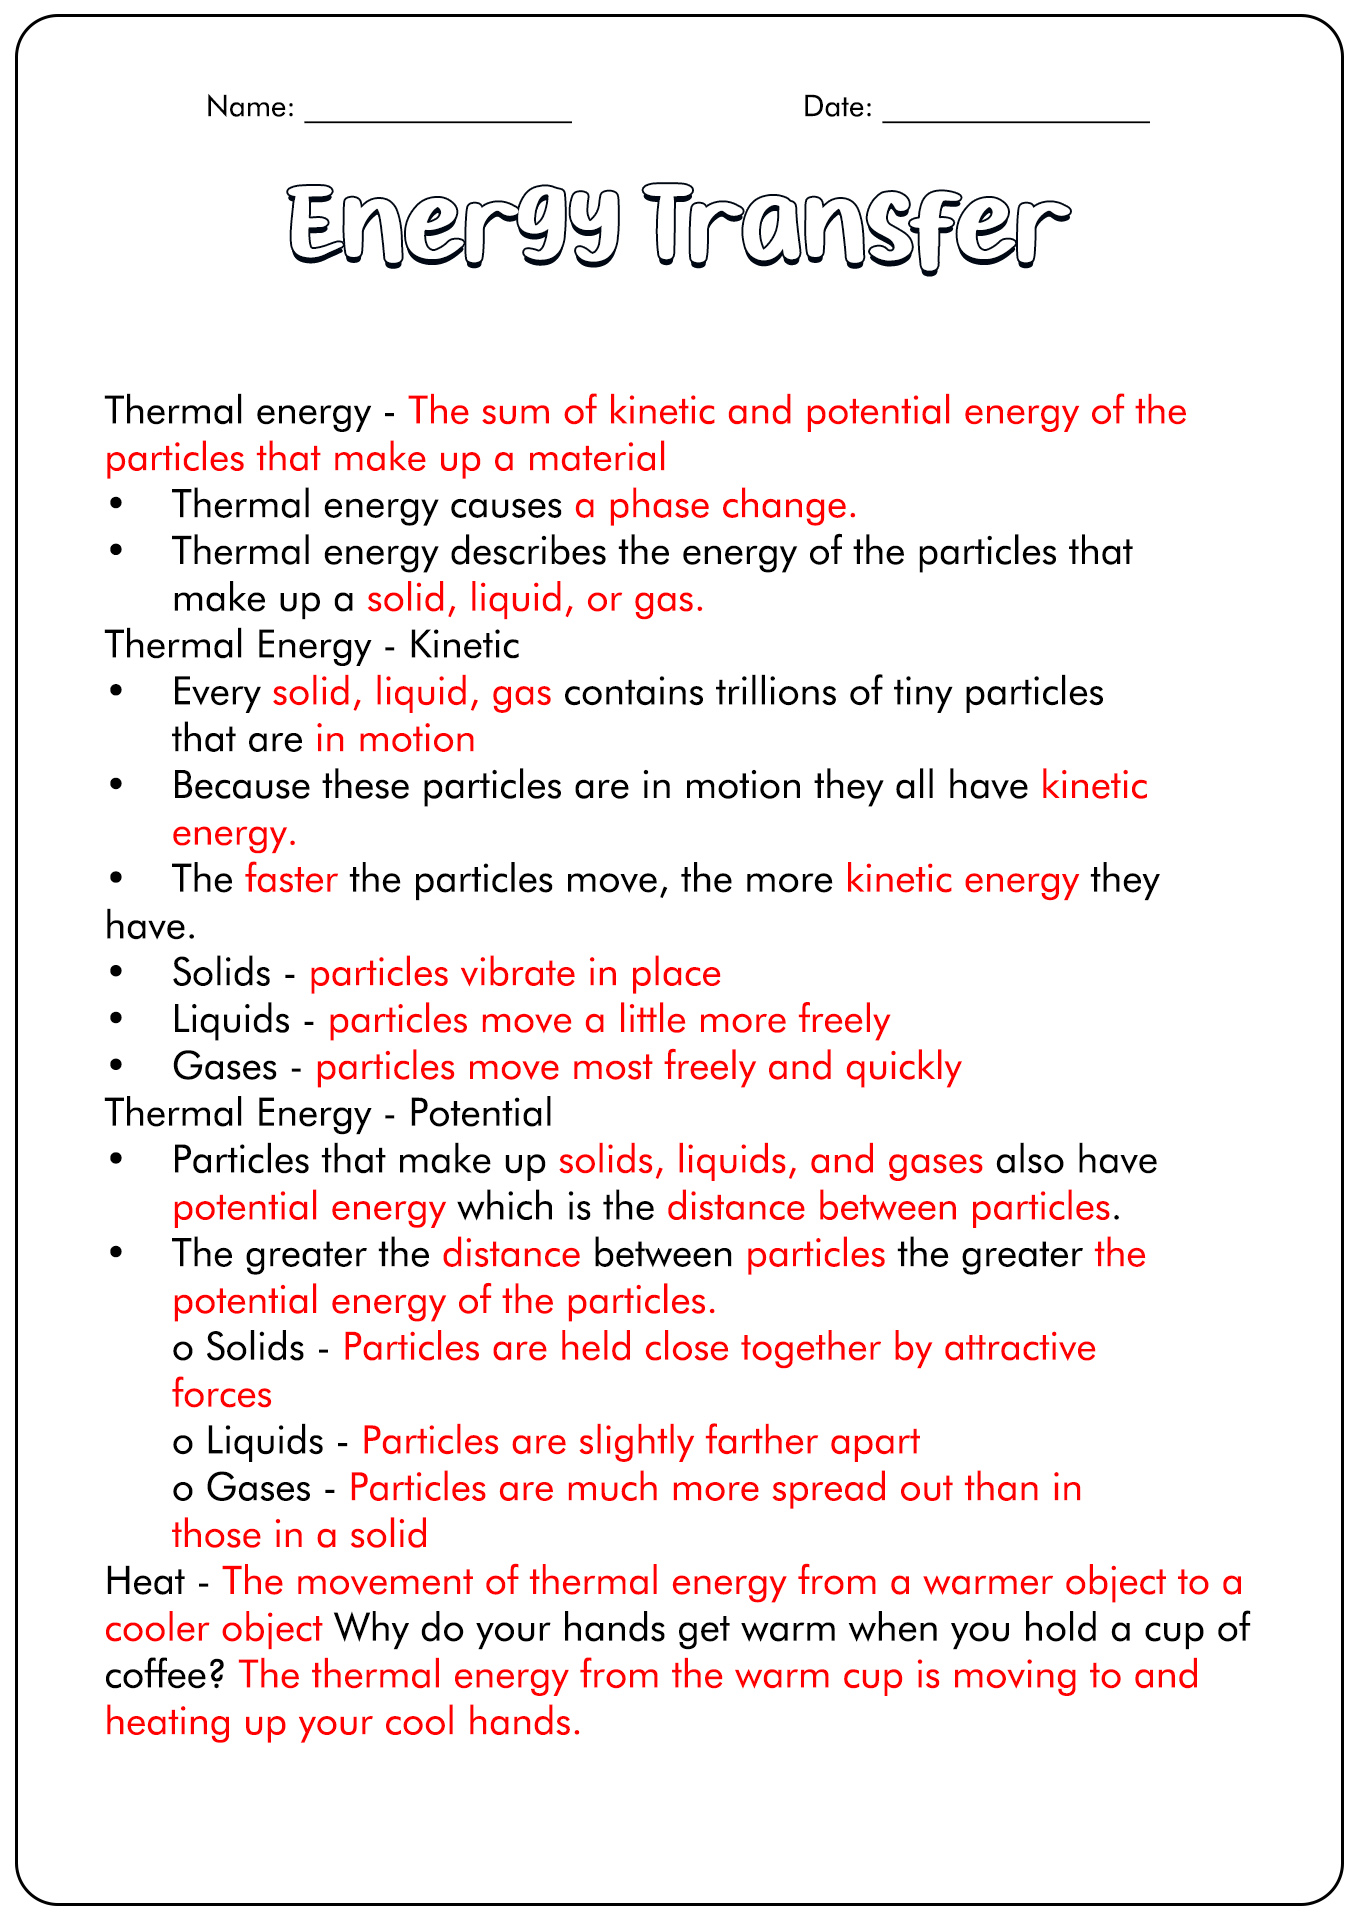 Heat and Thermal Energy Worksheet Answers